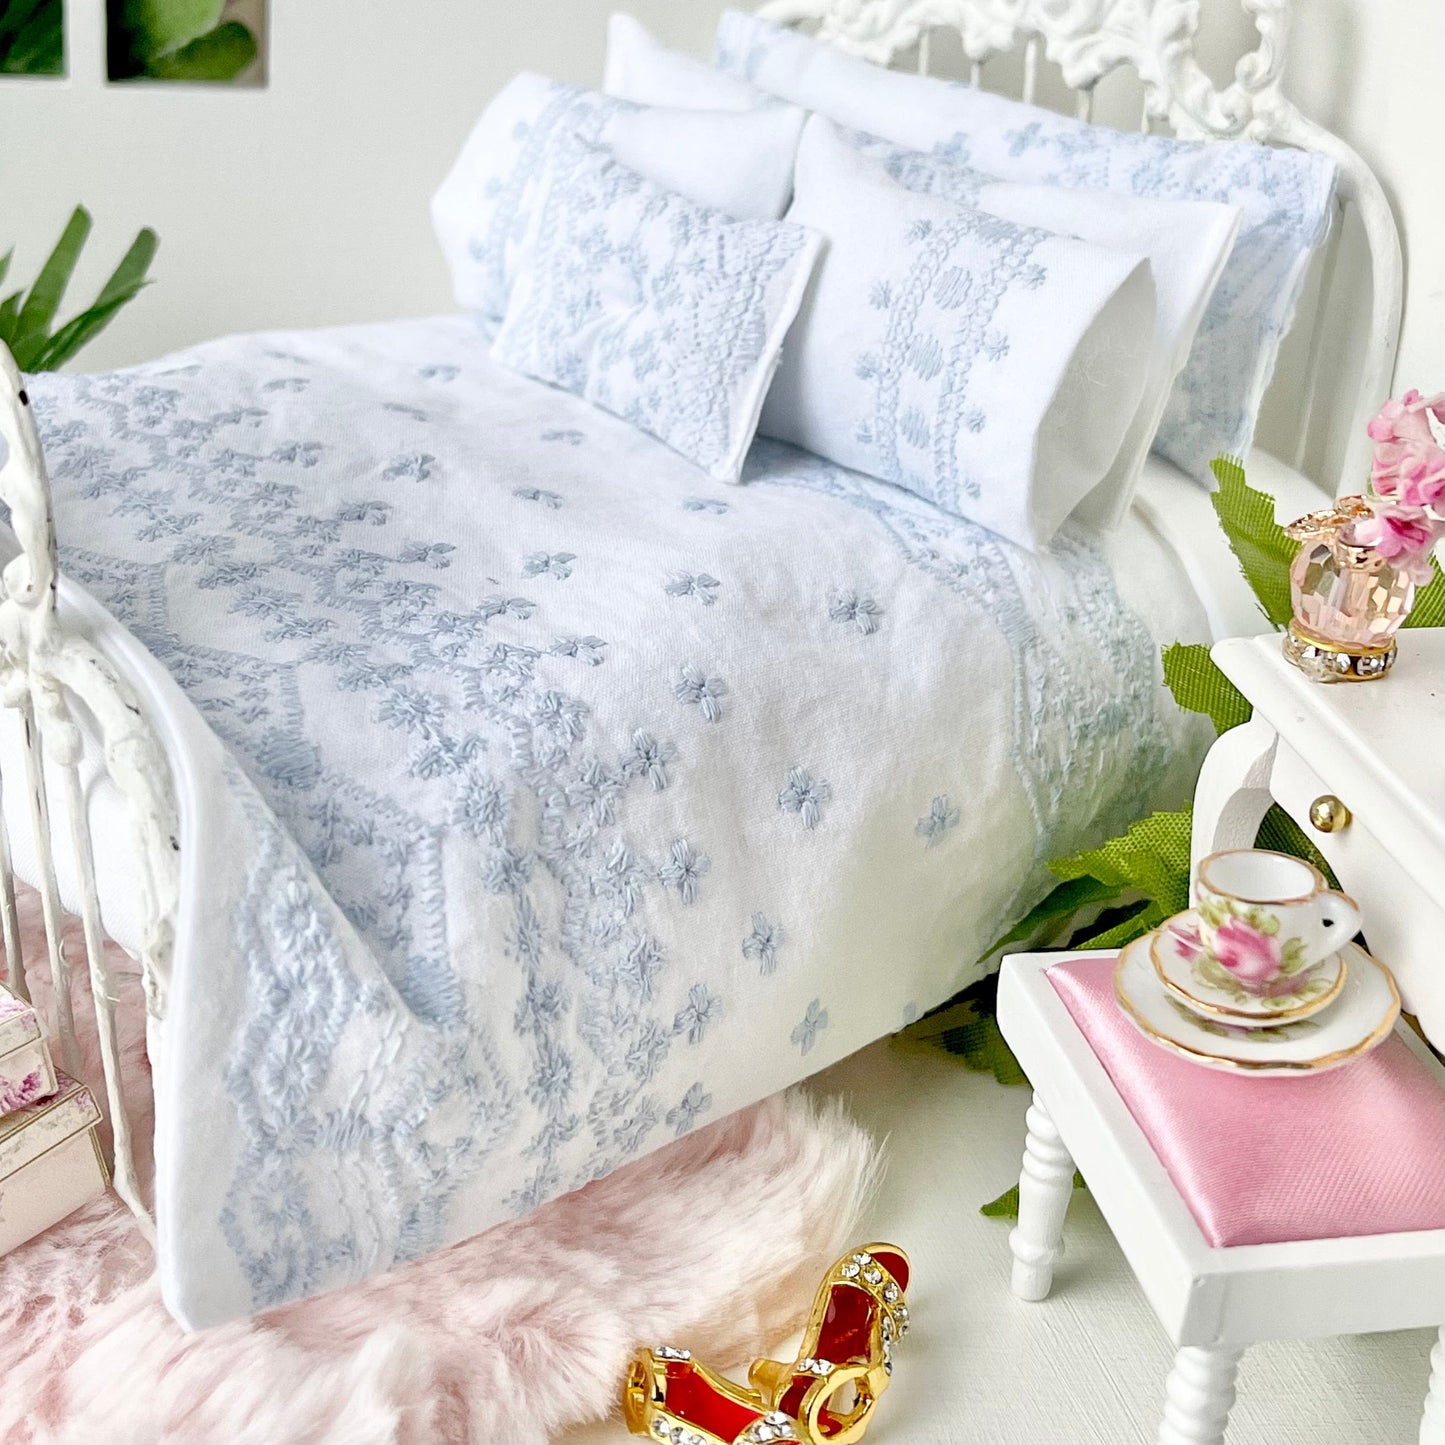 Chantallena Shabby Bed Linens Shabby Cottage- Six Piece Shabby Pale Blue Embroidered Bedding Set